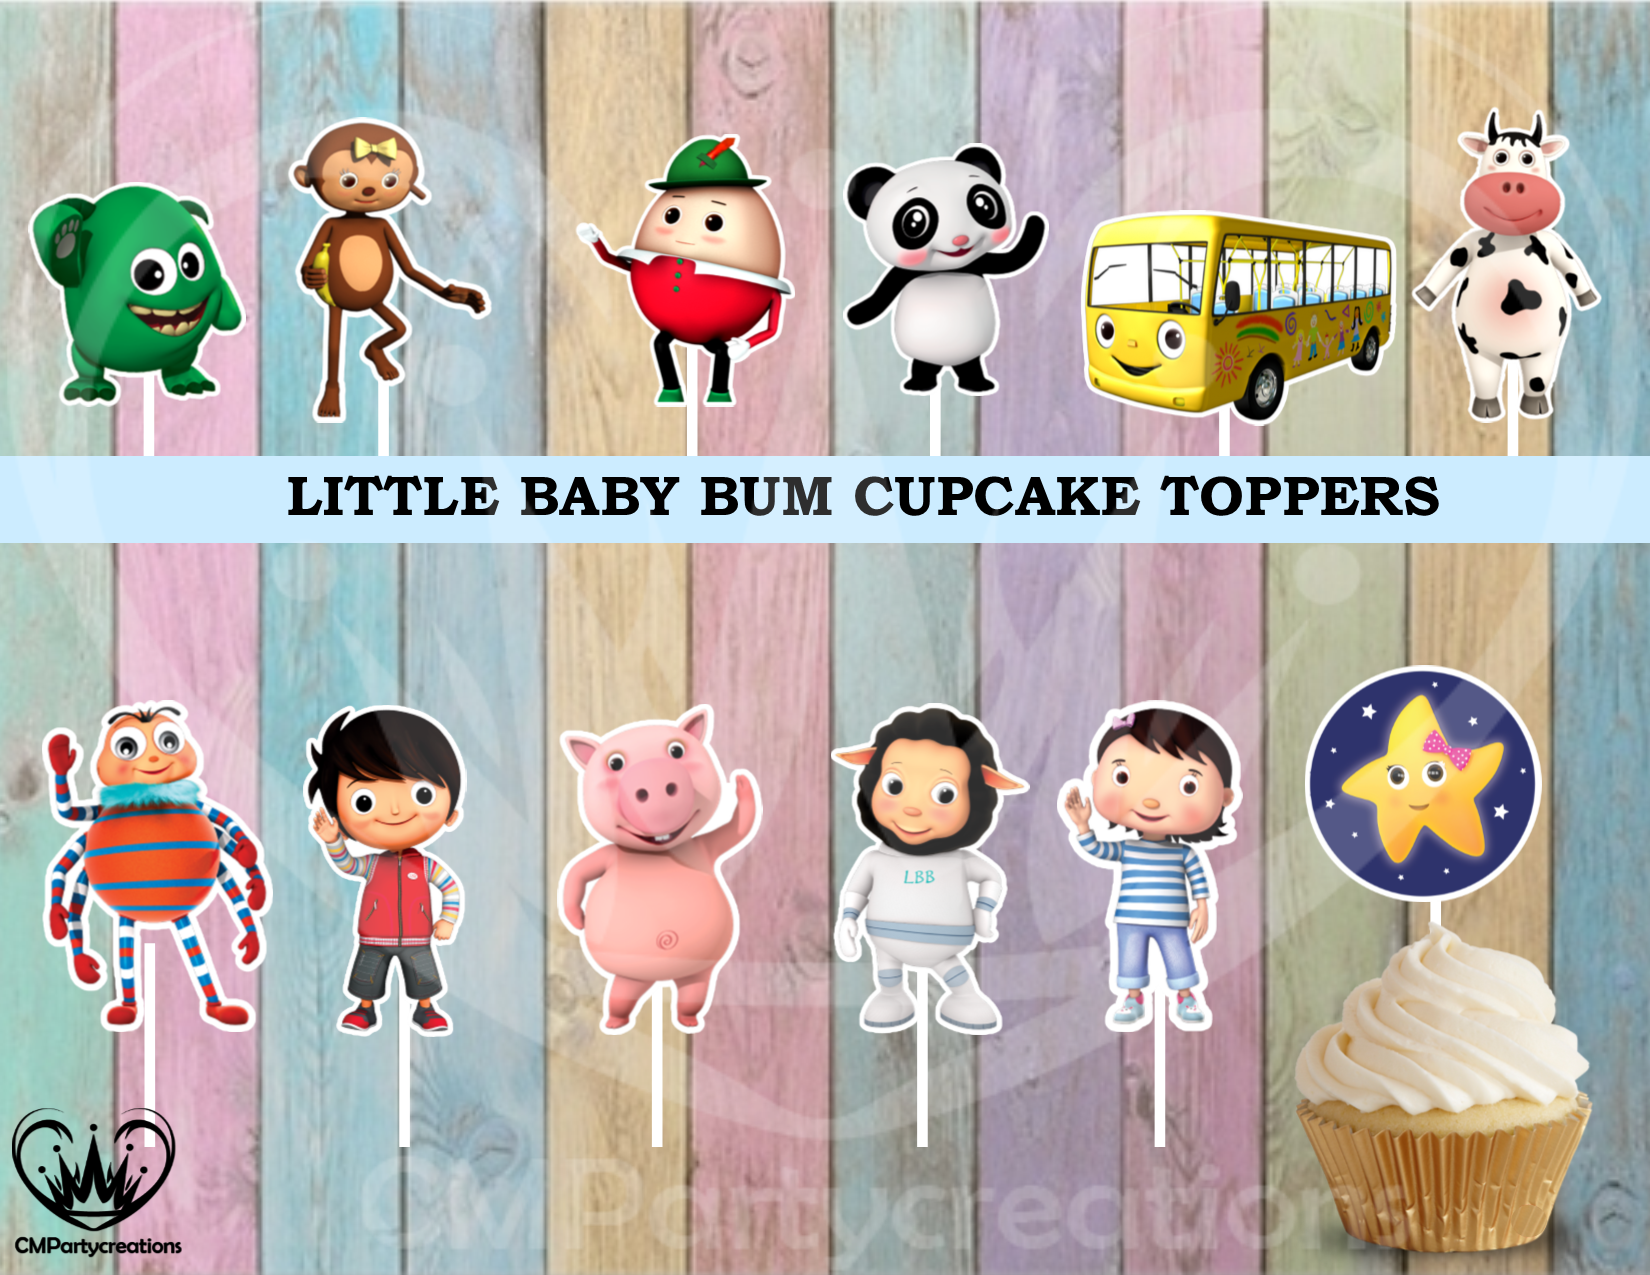 Paper Party Supplies Centerpieces Little Baby Bum Cupcake Toppers